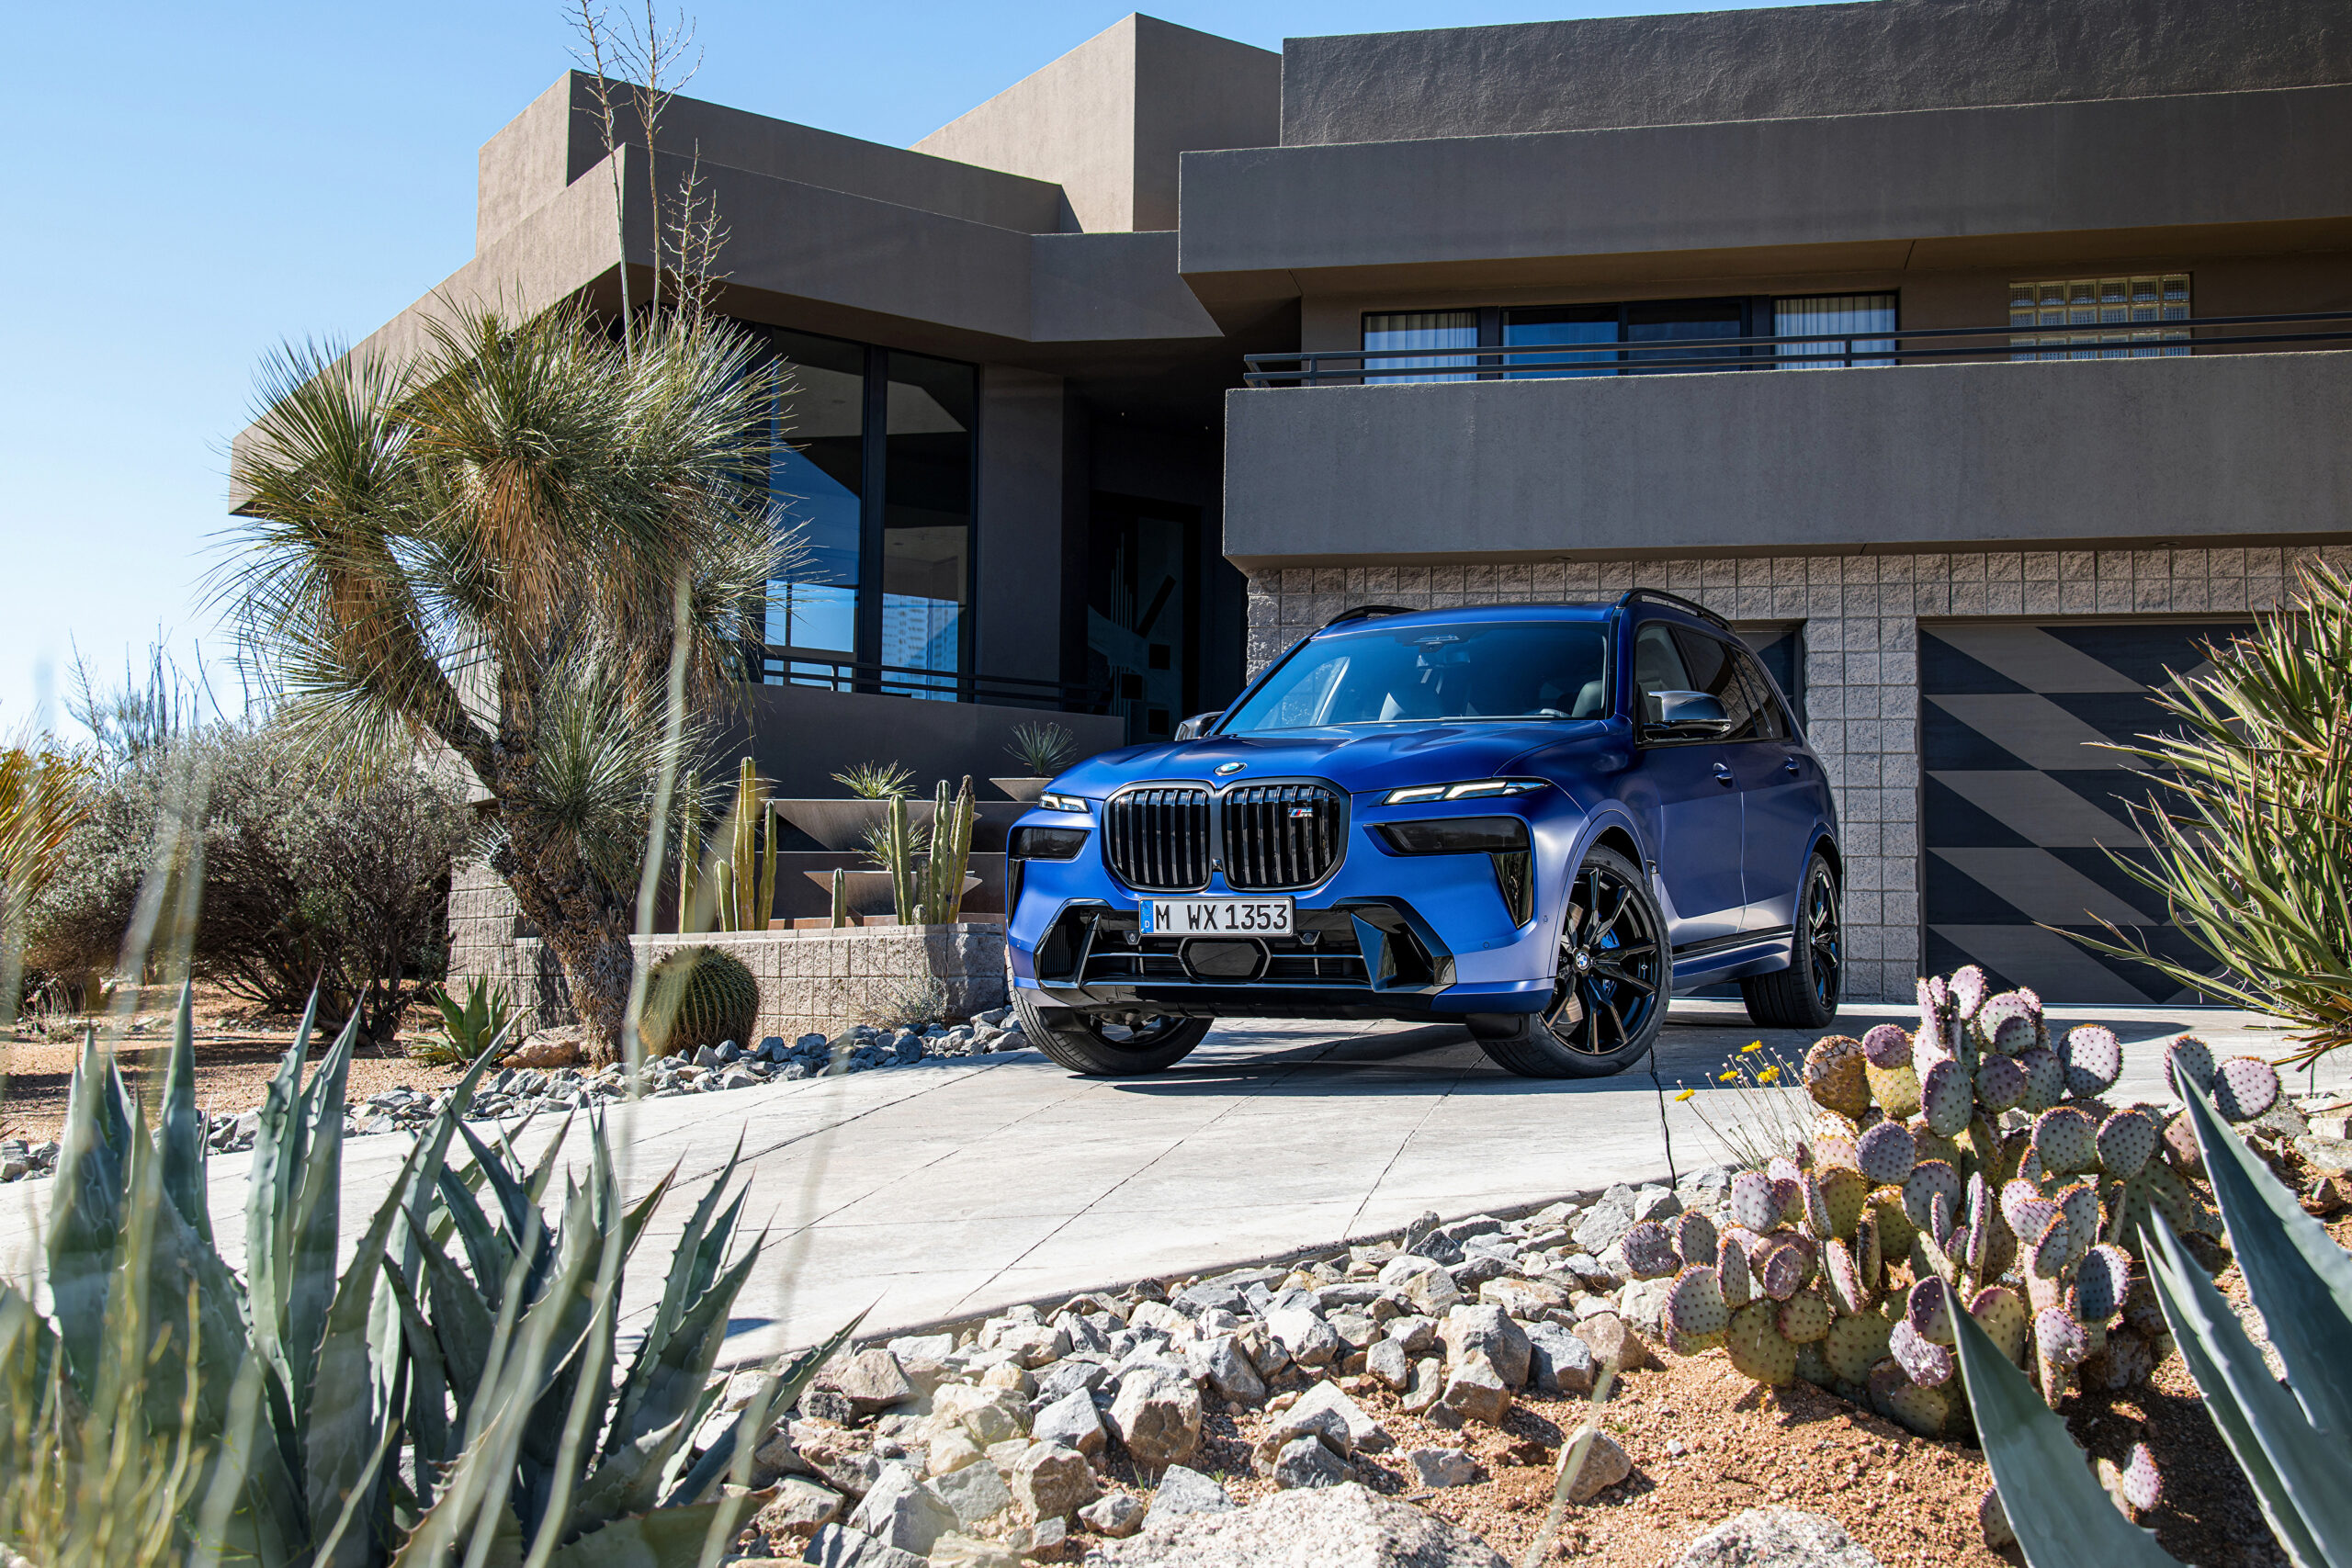 NFL Star Micah Parsons All car collection BMW X7